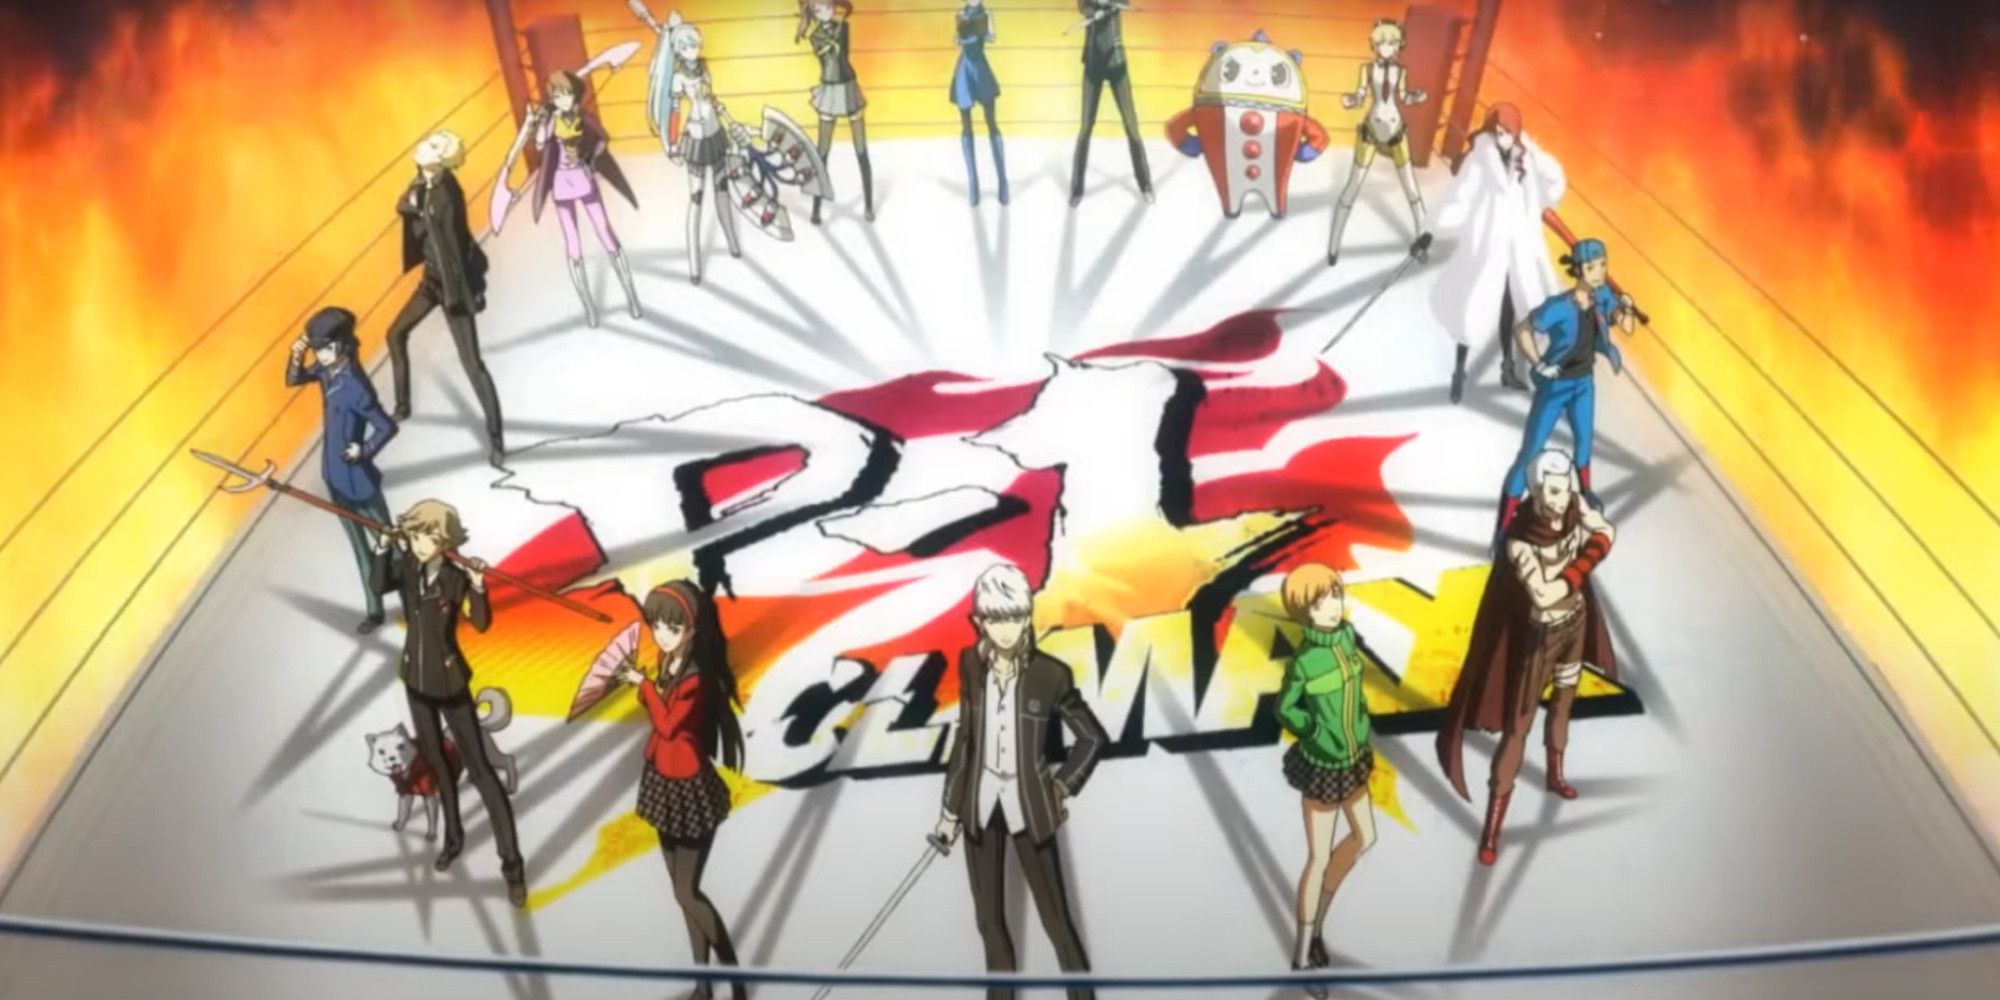 The cast of Persona 4 Arena Ultimax inside a fighting ring